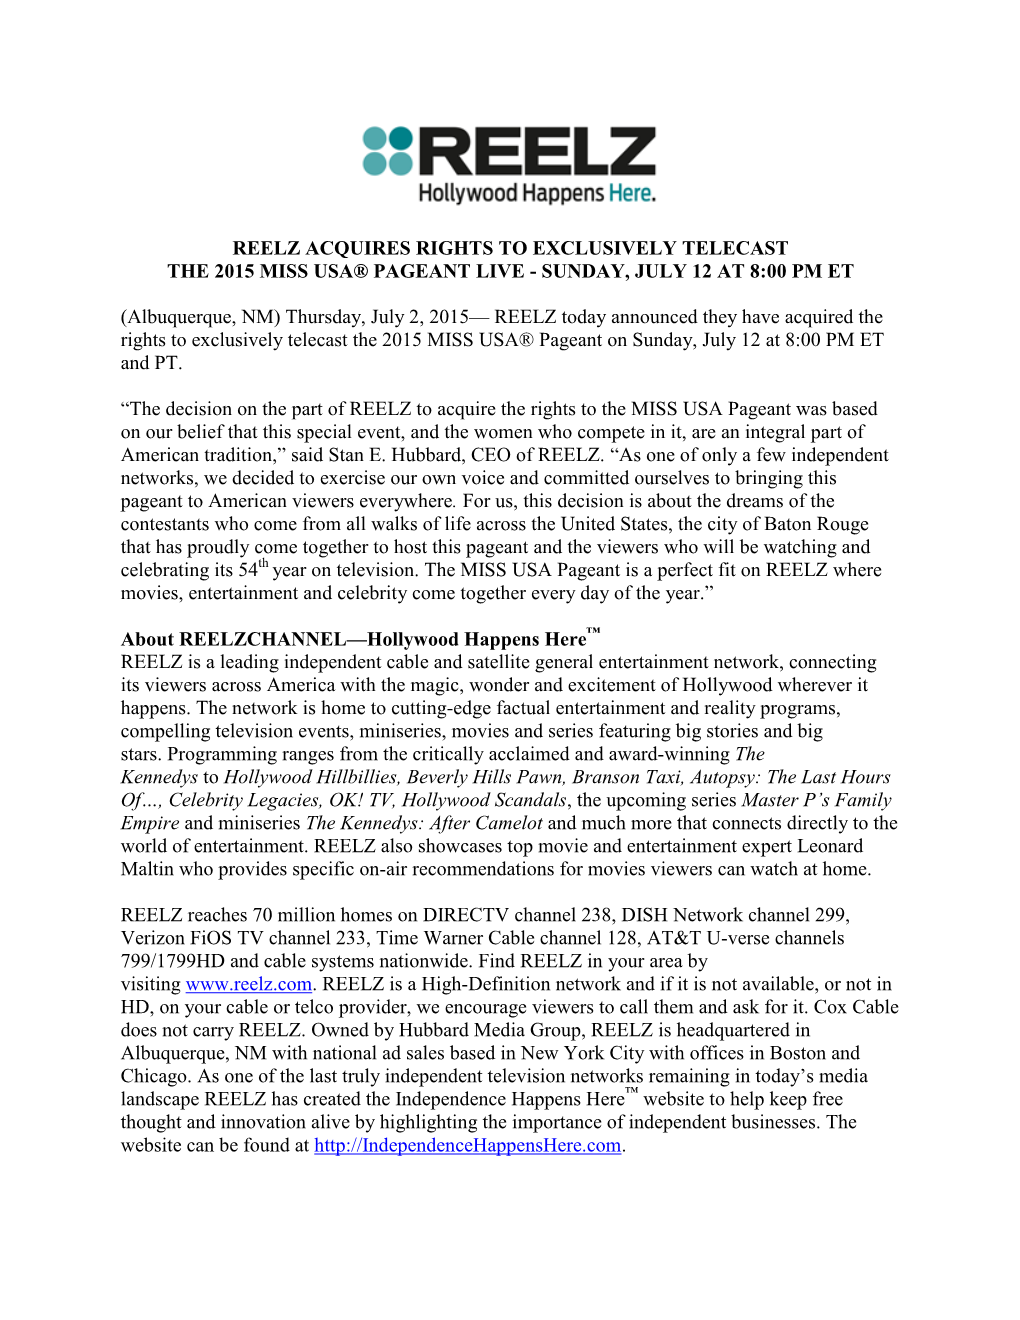 Reelz Acquires Rights to Exclusively Telecast the 2015 Miss Usa® Pageant Live - Sunday, July 12 at 8:00 Pm Et